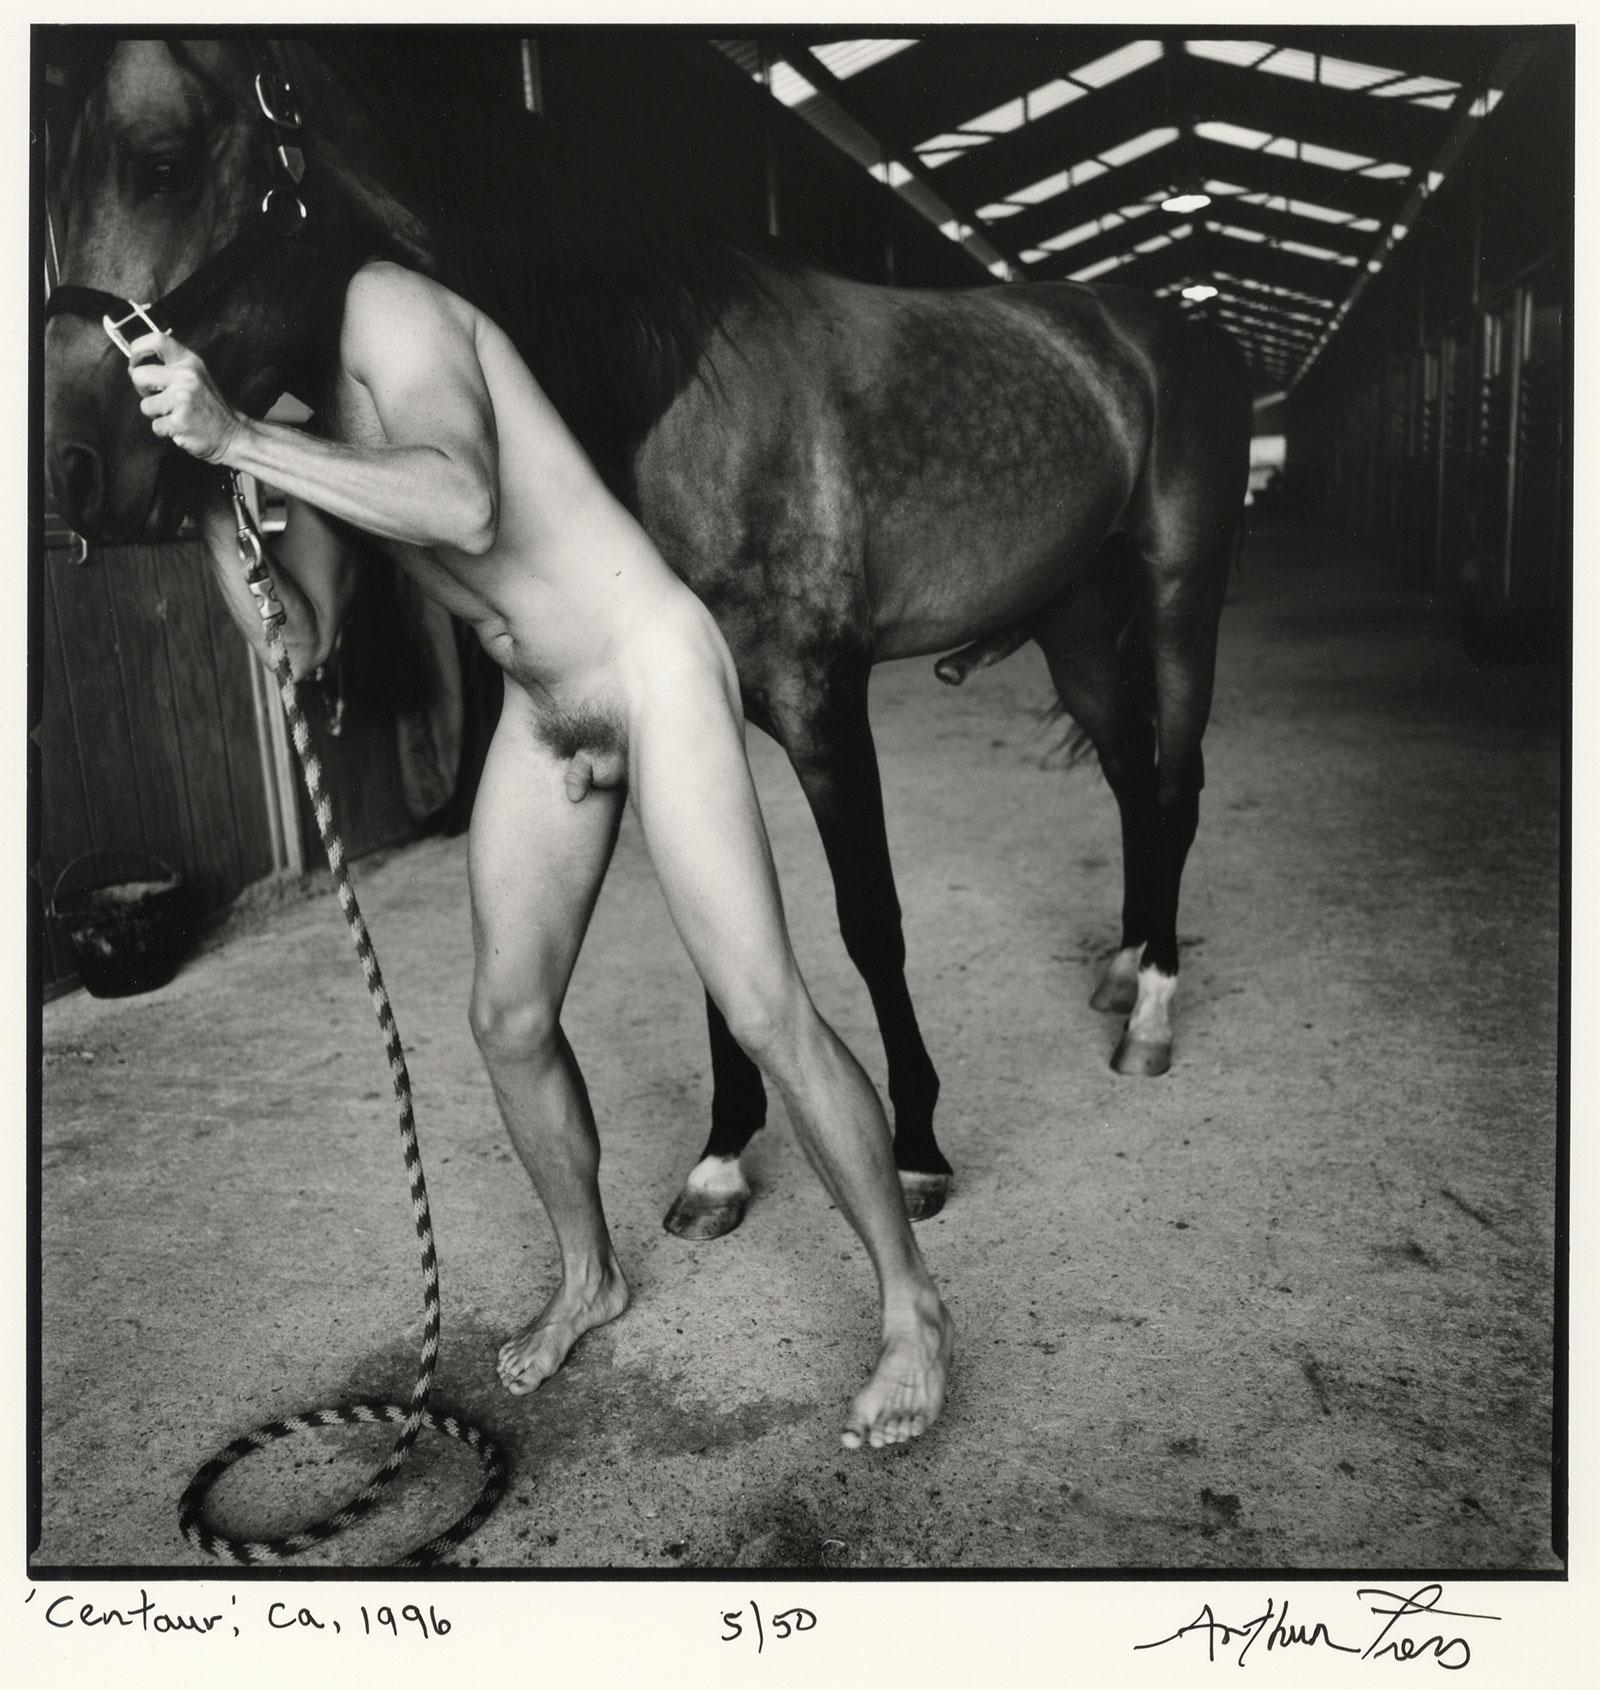 Centaur (mythological creature with a upper human body and lower body of horse) - Contemporary Photograph by Arthur Tress